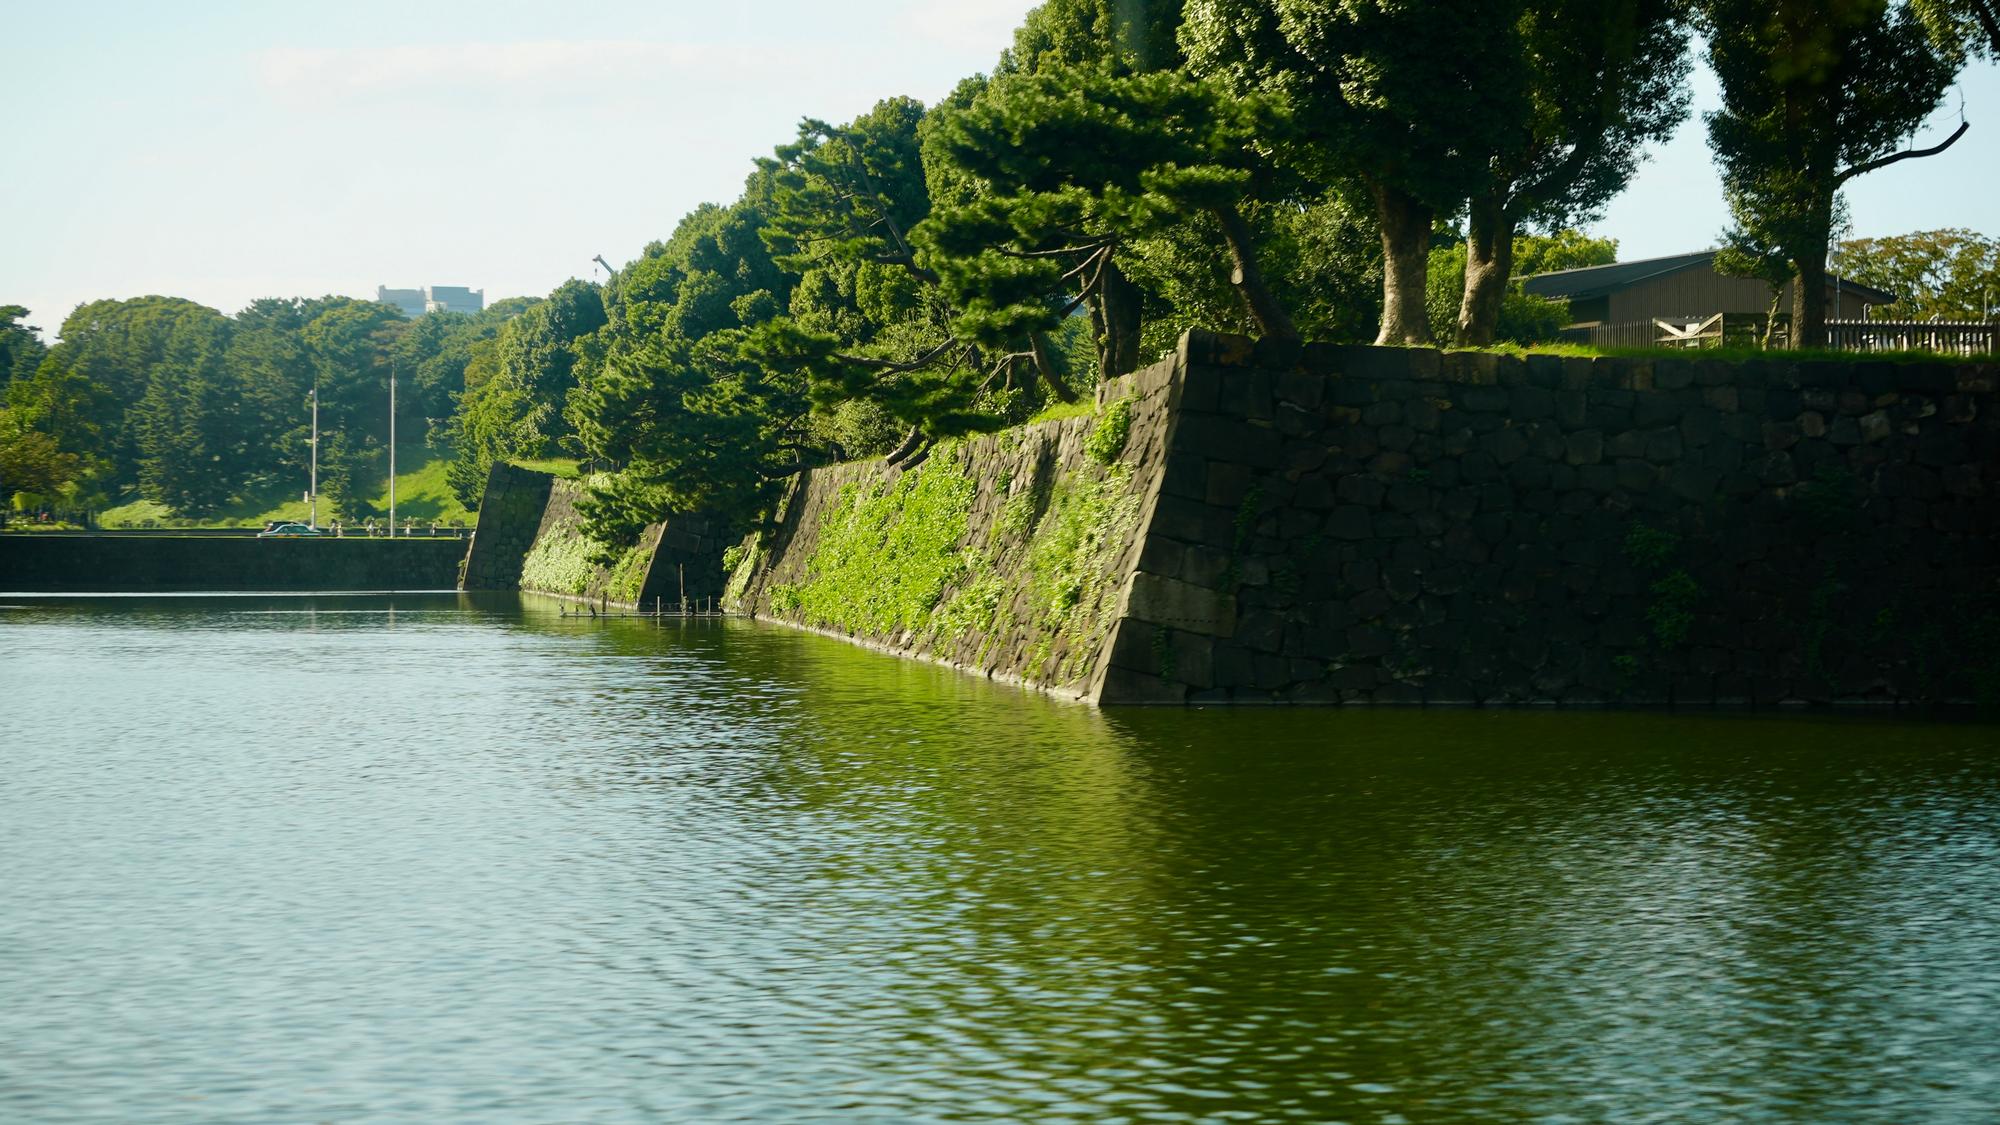 Wall and Moat surrounding the Imperial Palace